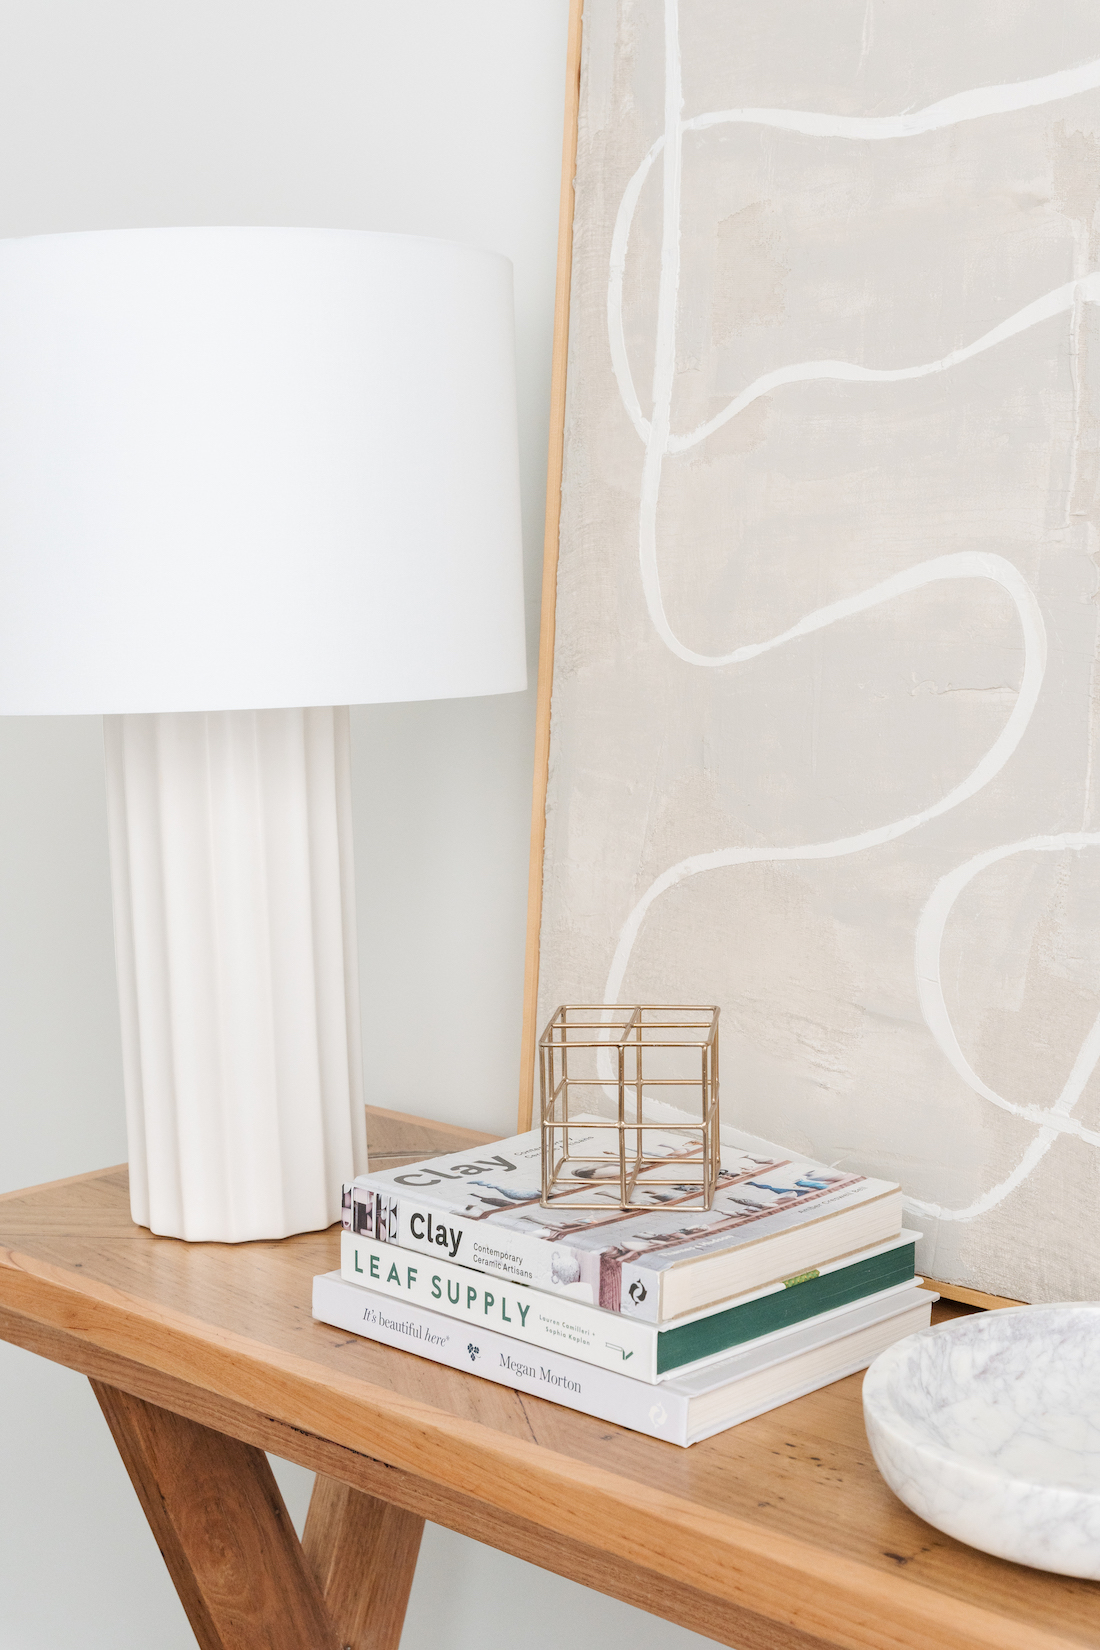 Table lamp adds an element of height